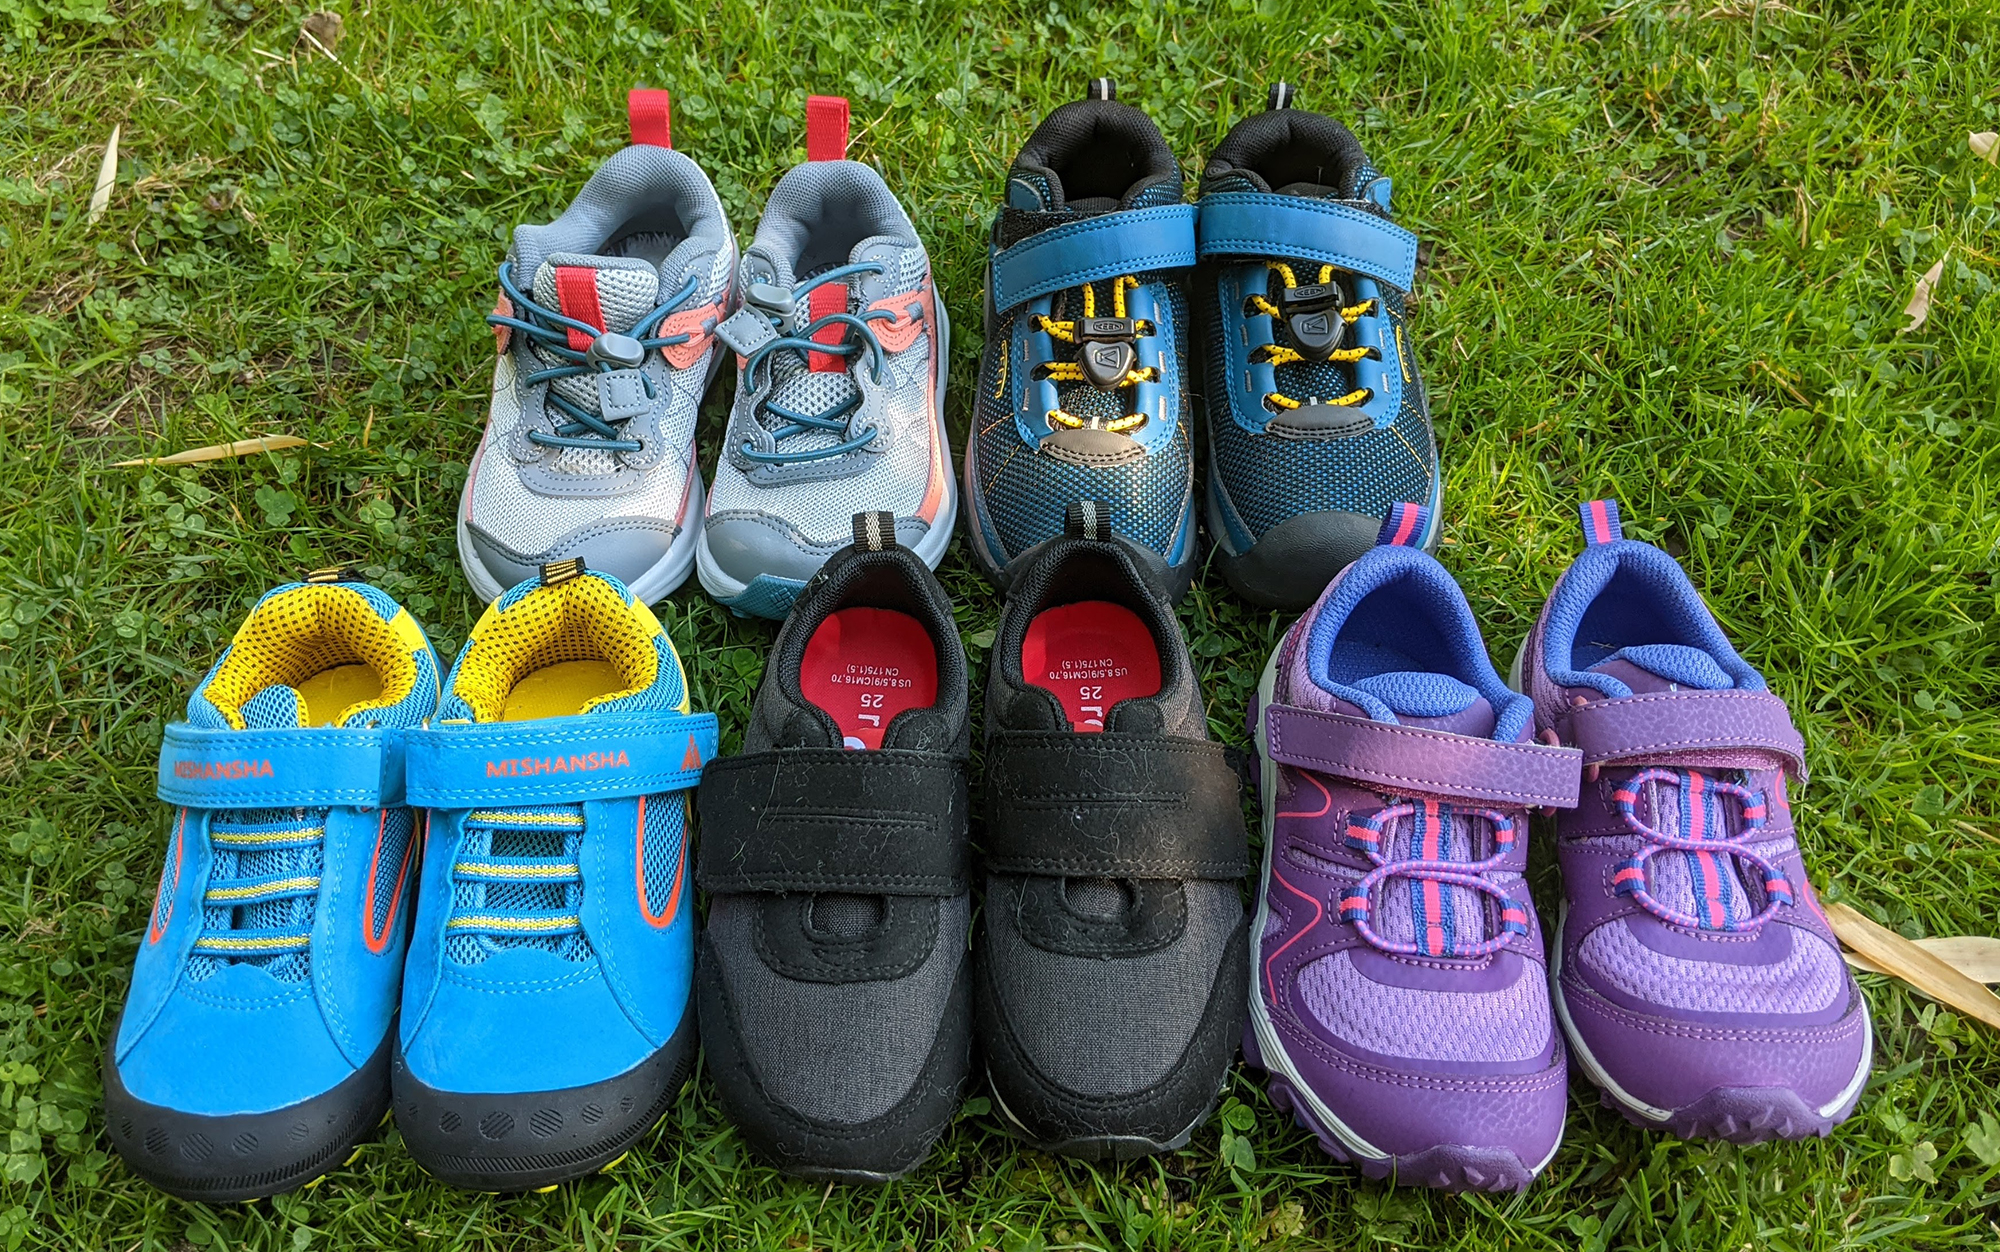 The best hiking shoes for kids lined up in the grass.